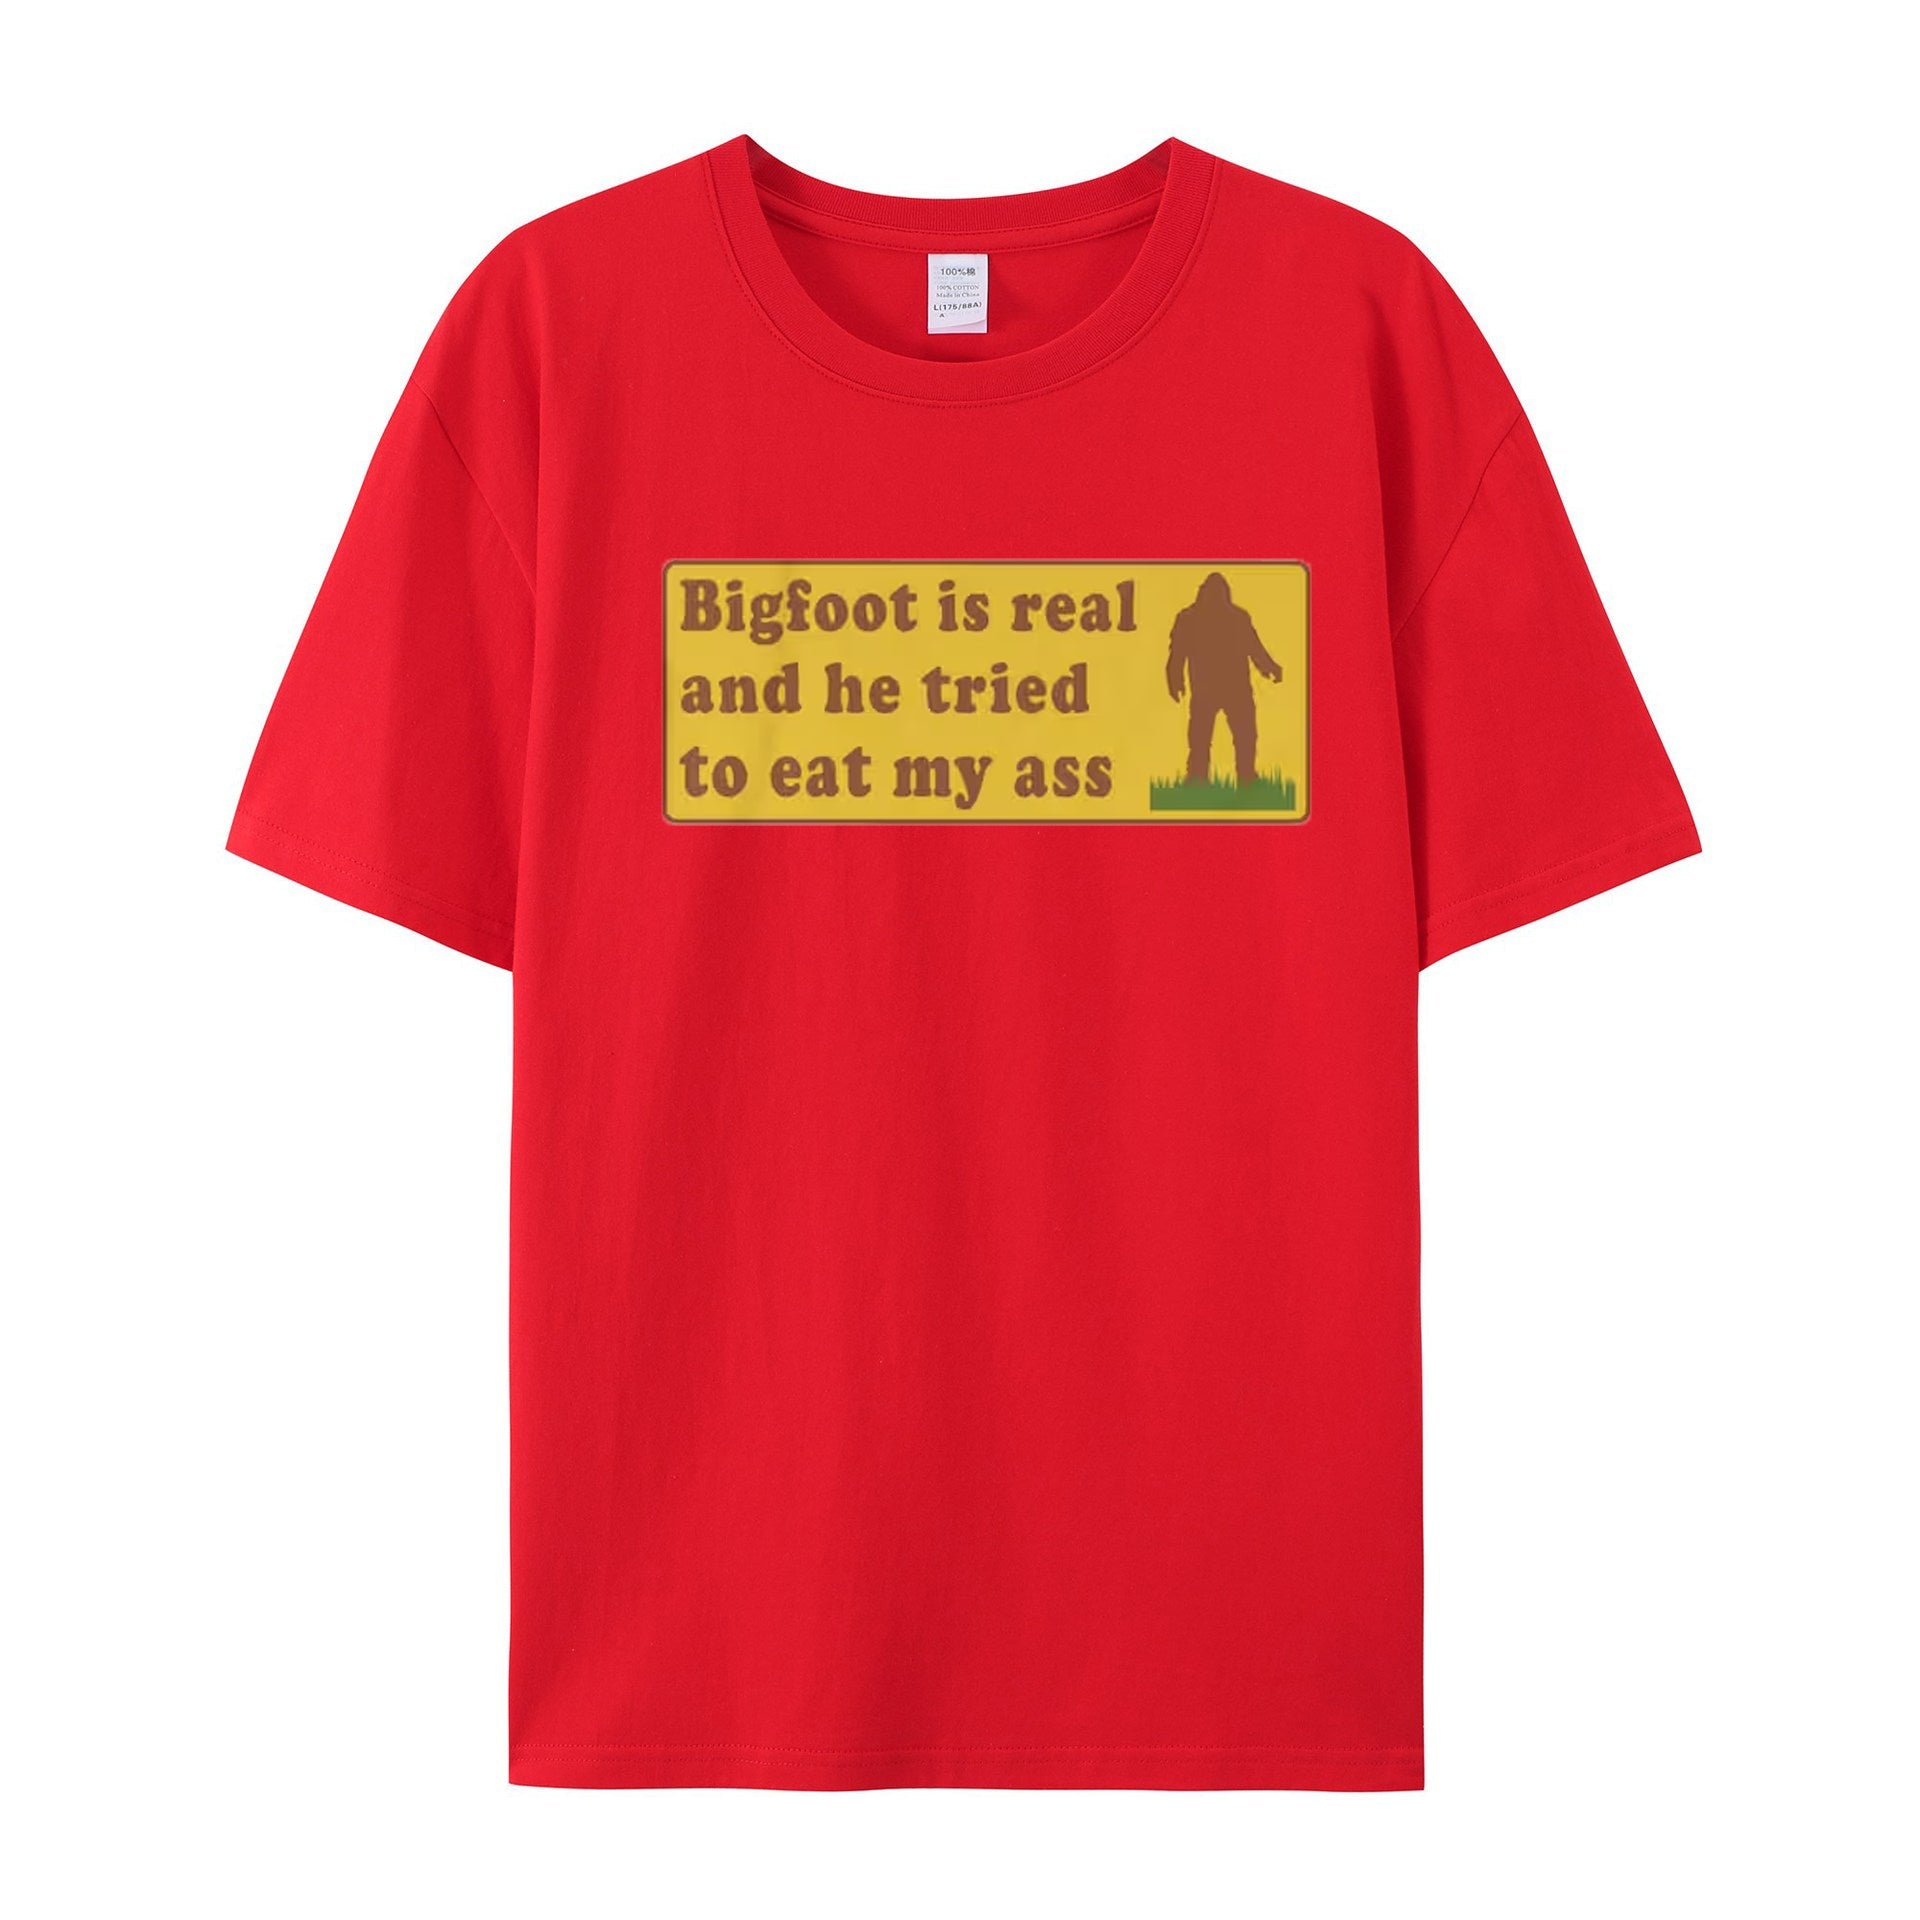 Funny Meme TShirt, Bigfoot Is Real And He Tried To Eat My Ass Funny Oddly Specific Joke Tee, Gift Shirt - Shapelys